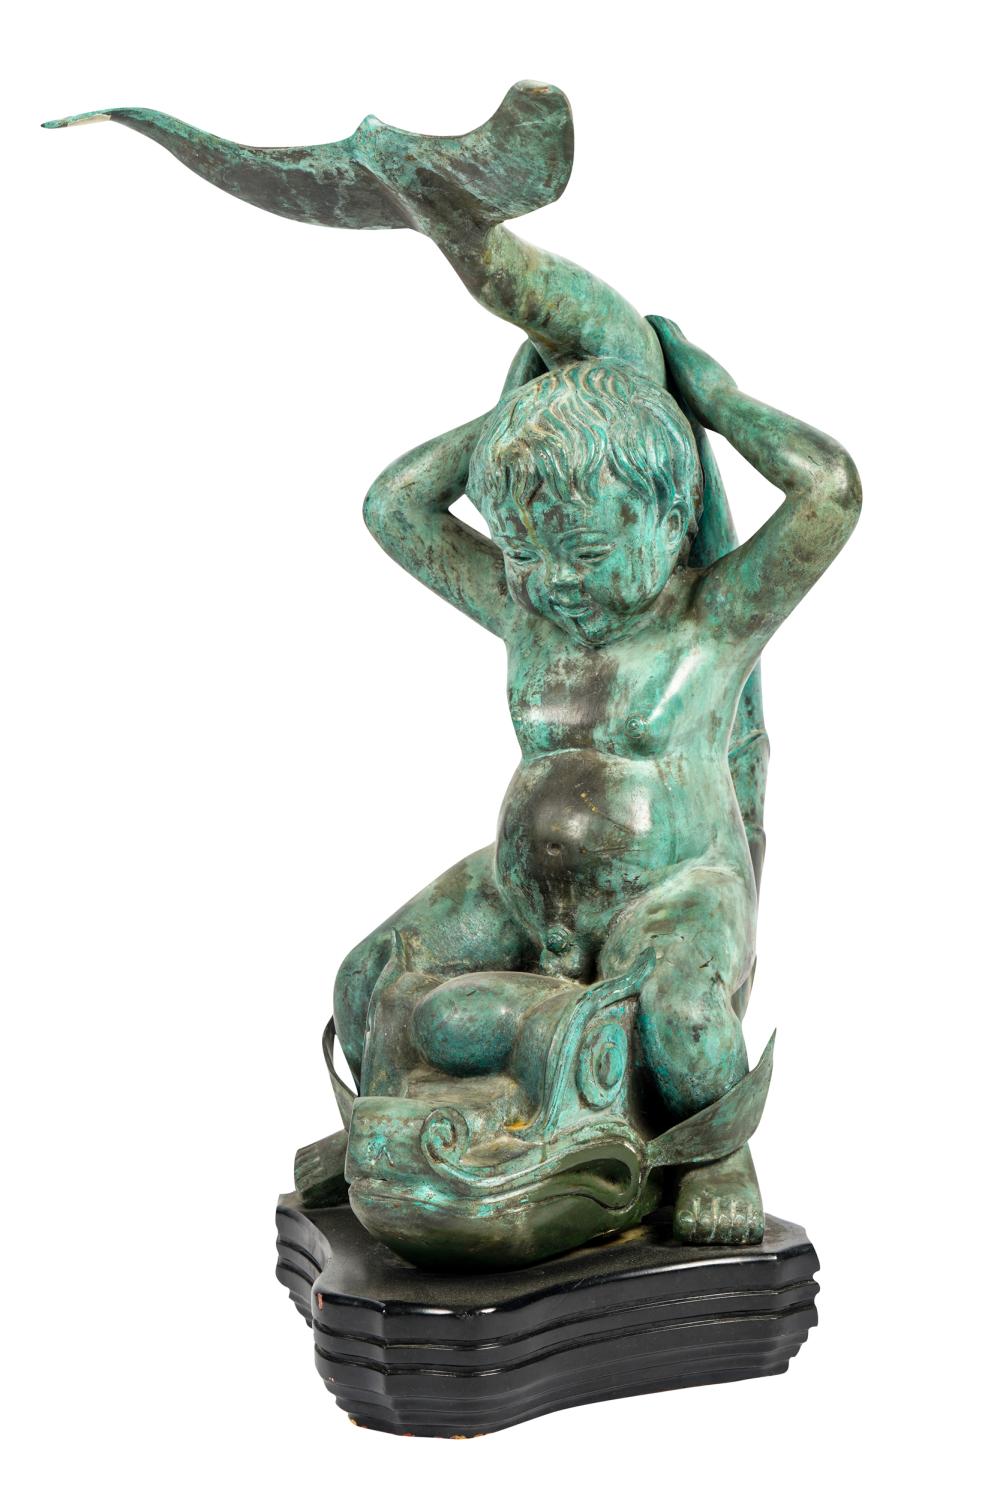 BRONZE FIGURE OF A BOY & DOLPHINmounted